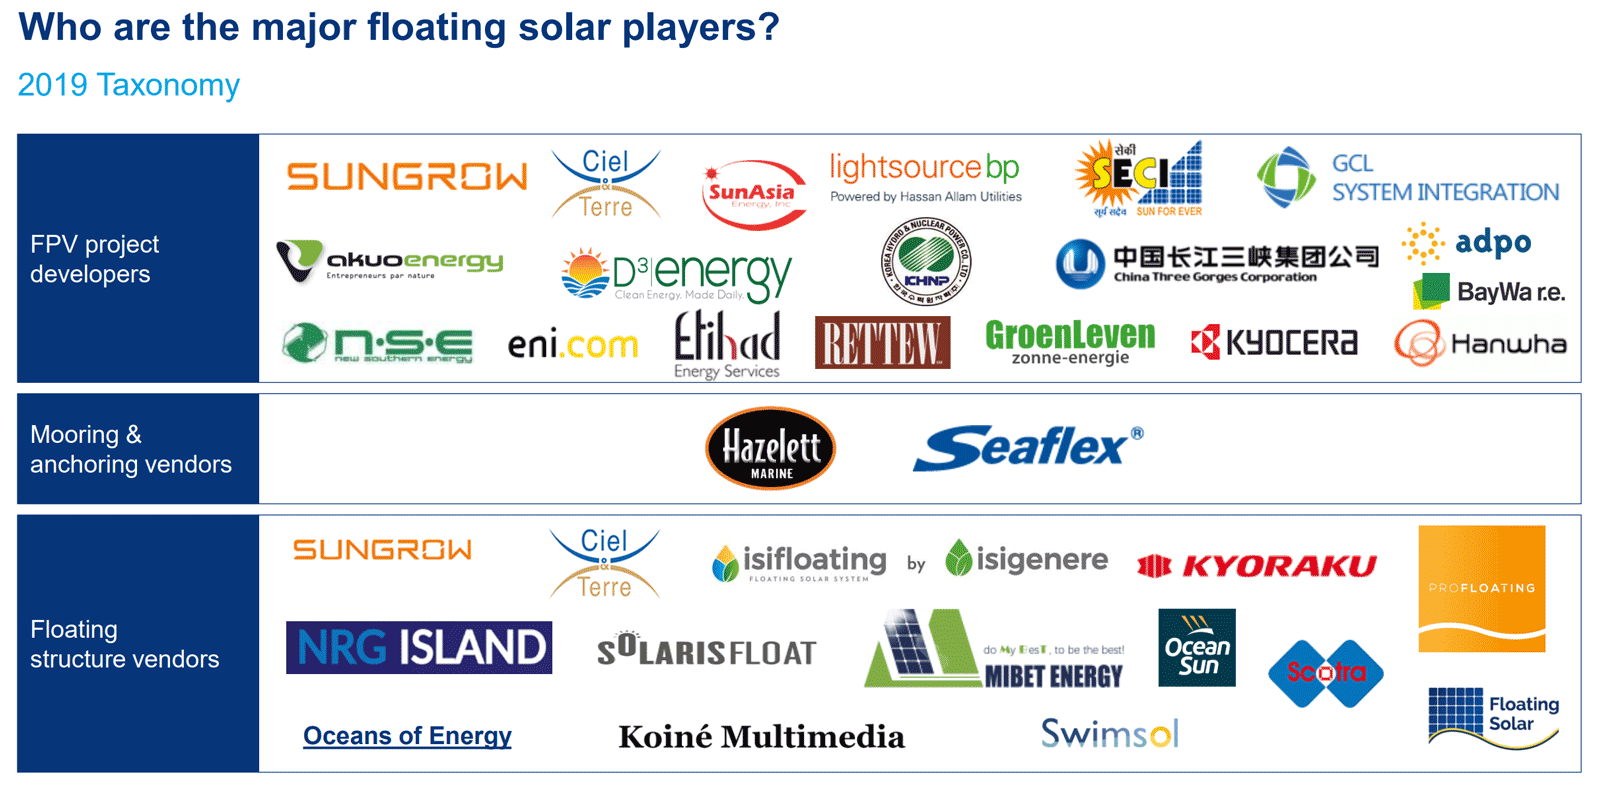 Taxonomy of companies in floating solar market in 2019